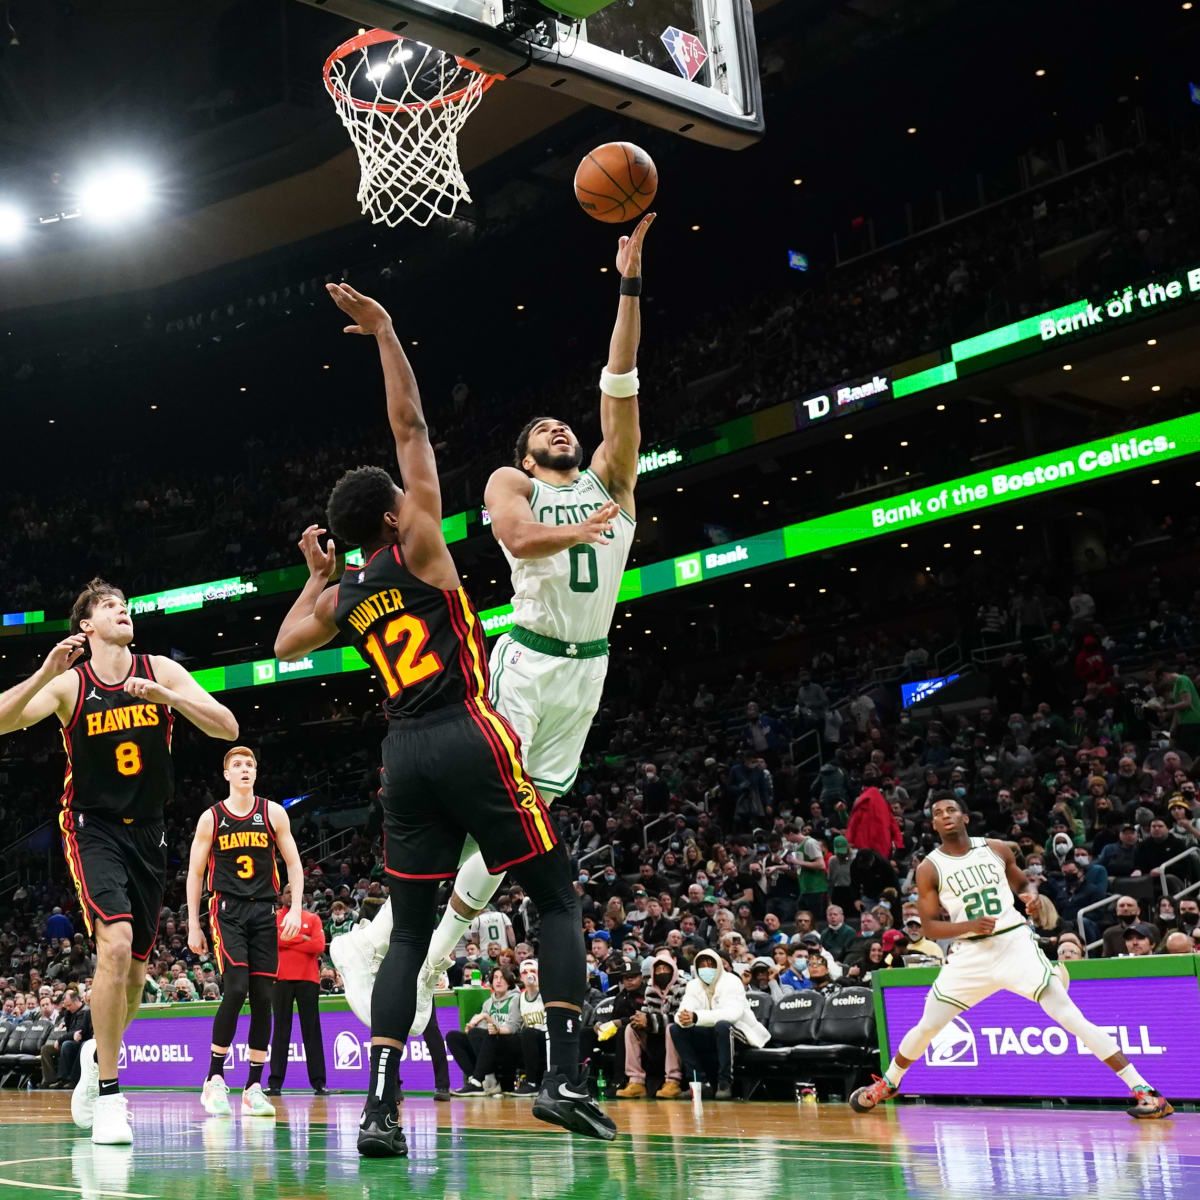 Celtics humbled by Hawks, go 0 for 3 on road trip